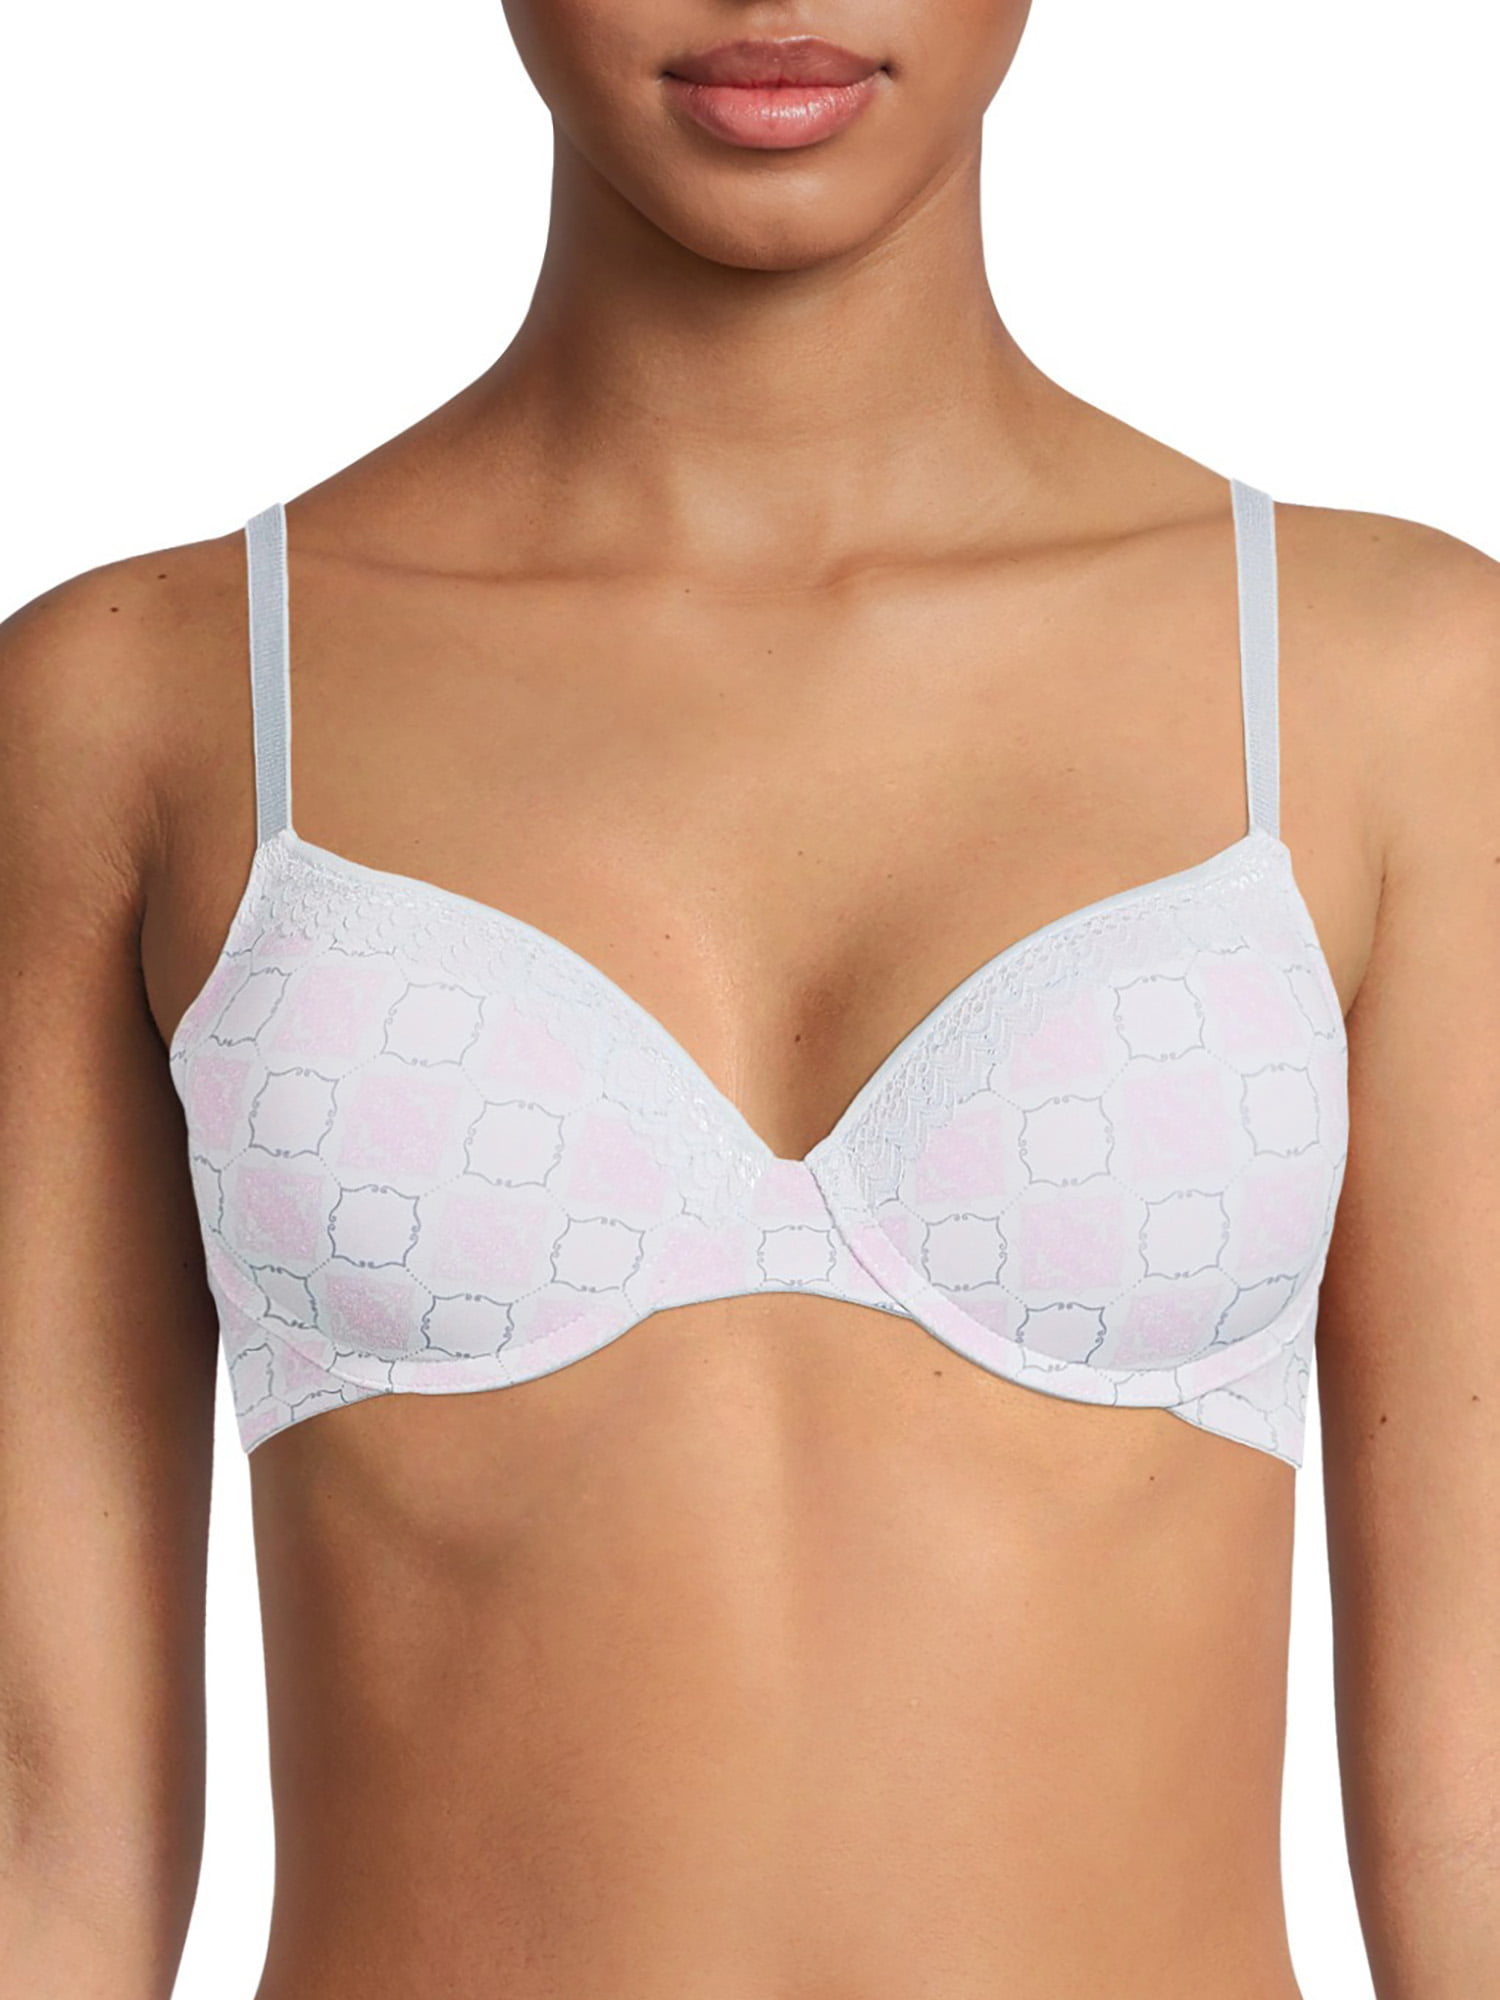 Jessica Simpson Printed & Solid Micro T-shirt Bras In Kentucky Blue  Prt/seashell Pink